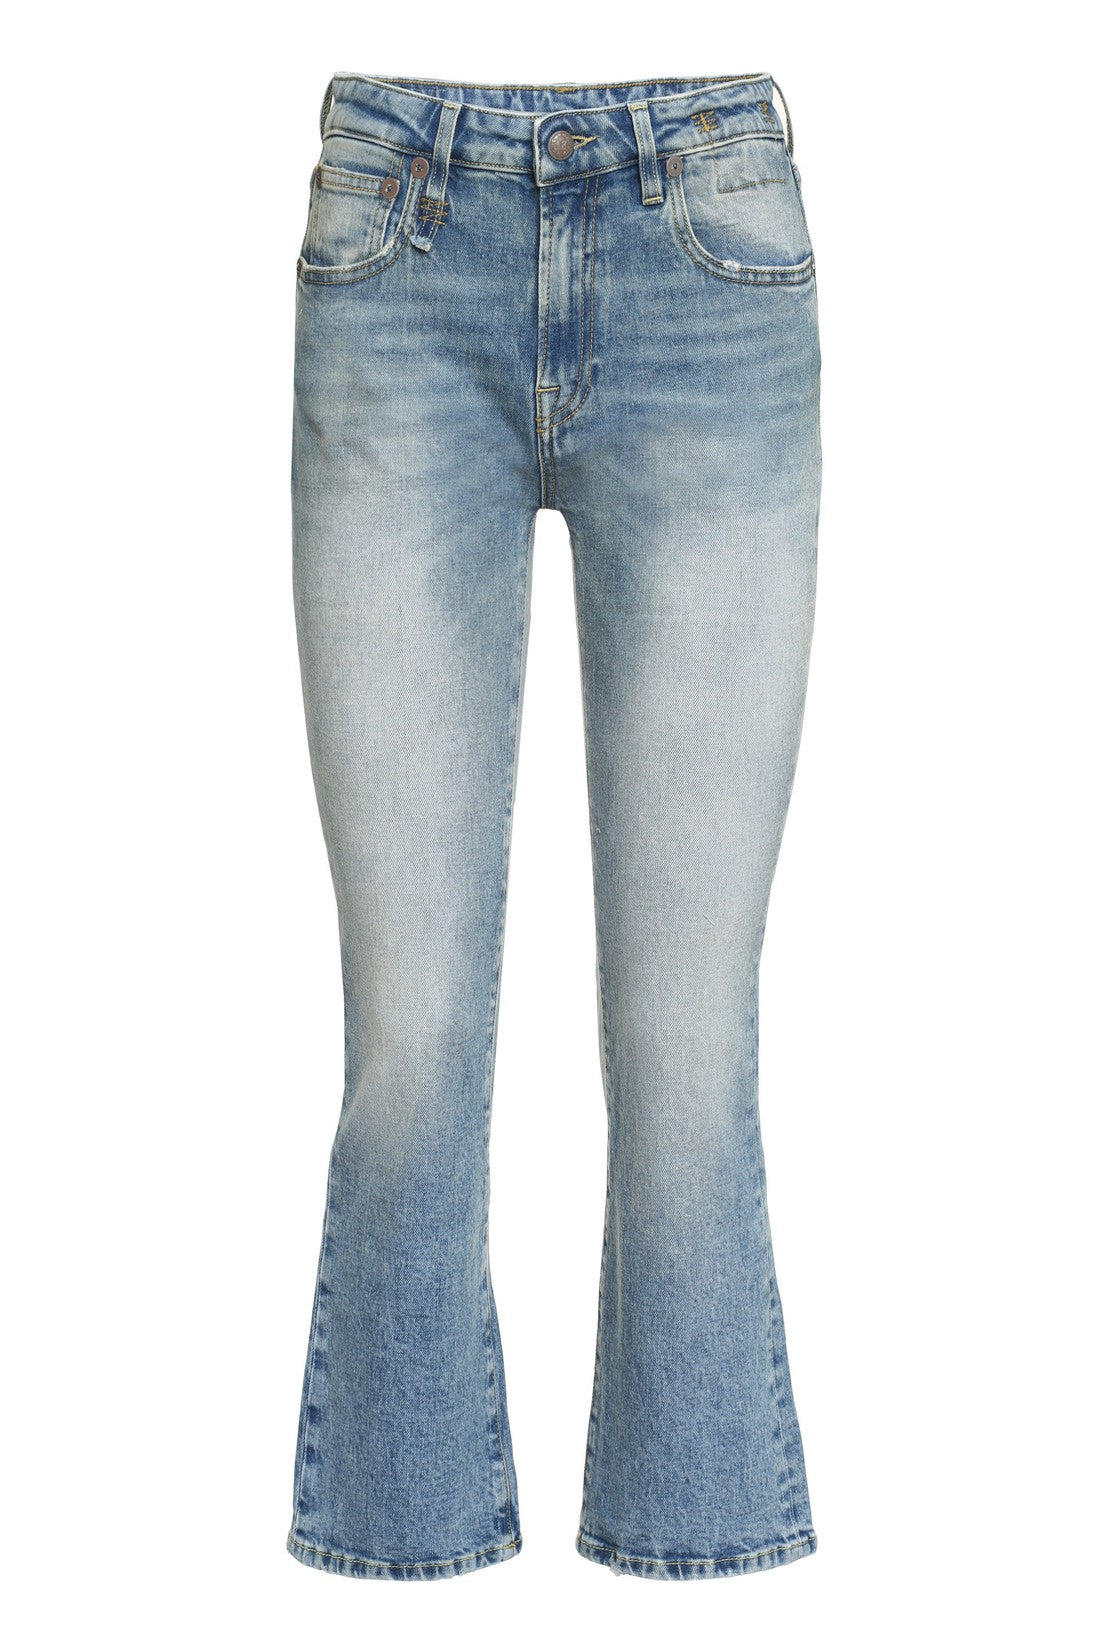 R13-OUTLET-SALE-Cropped flared jeans-ARCHIVIST